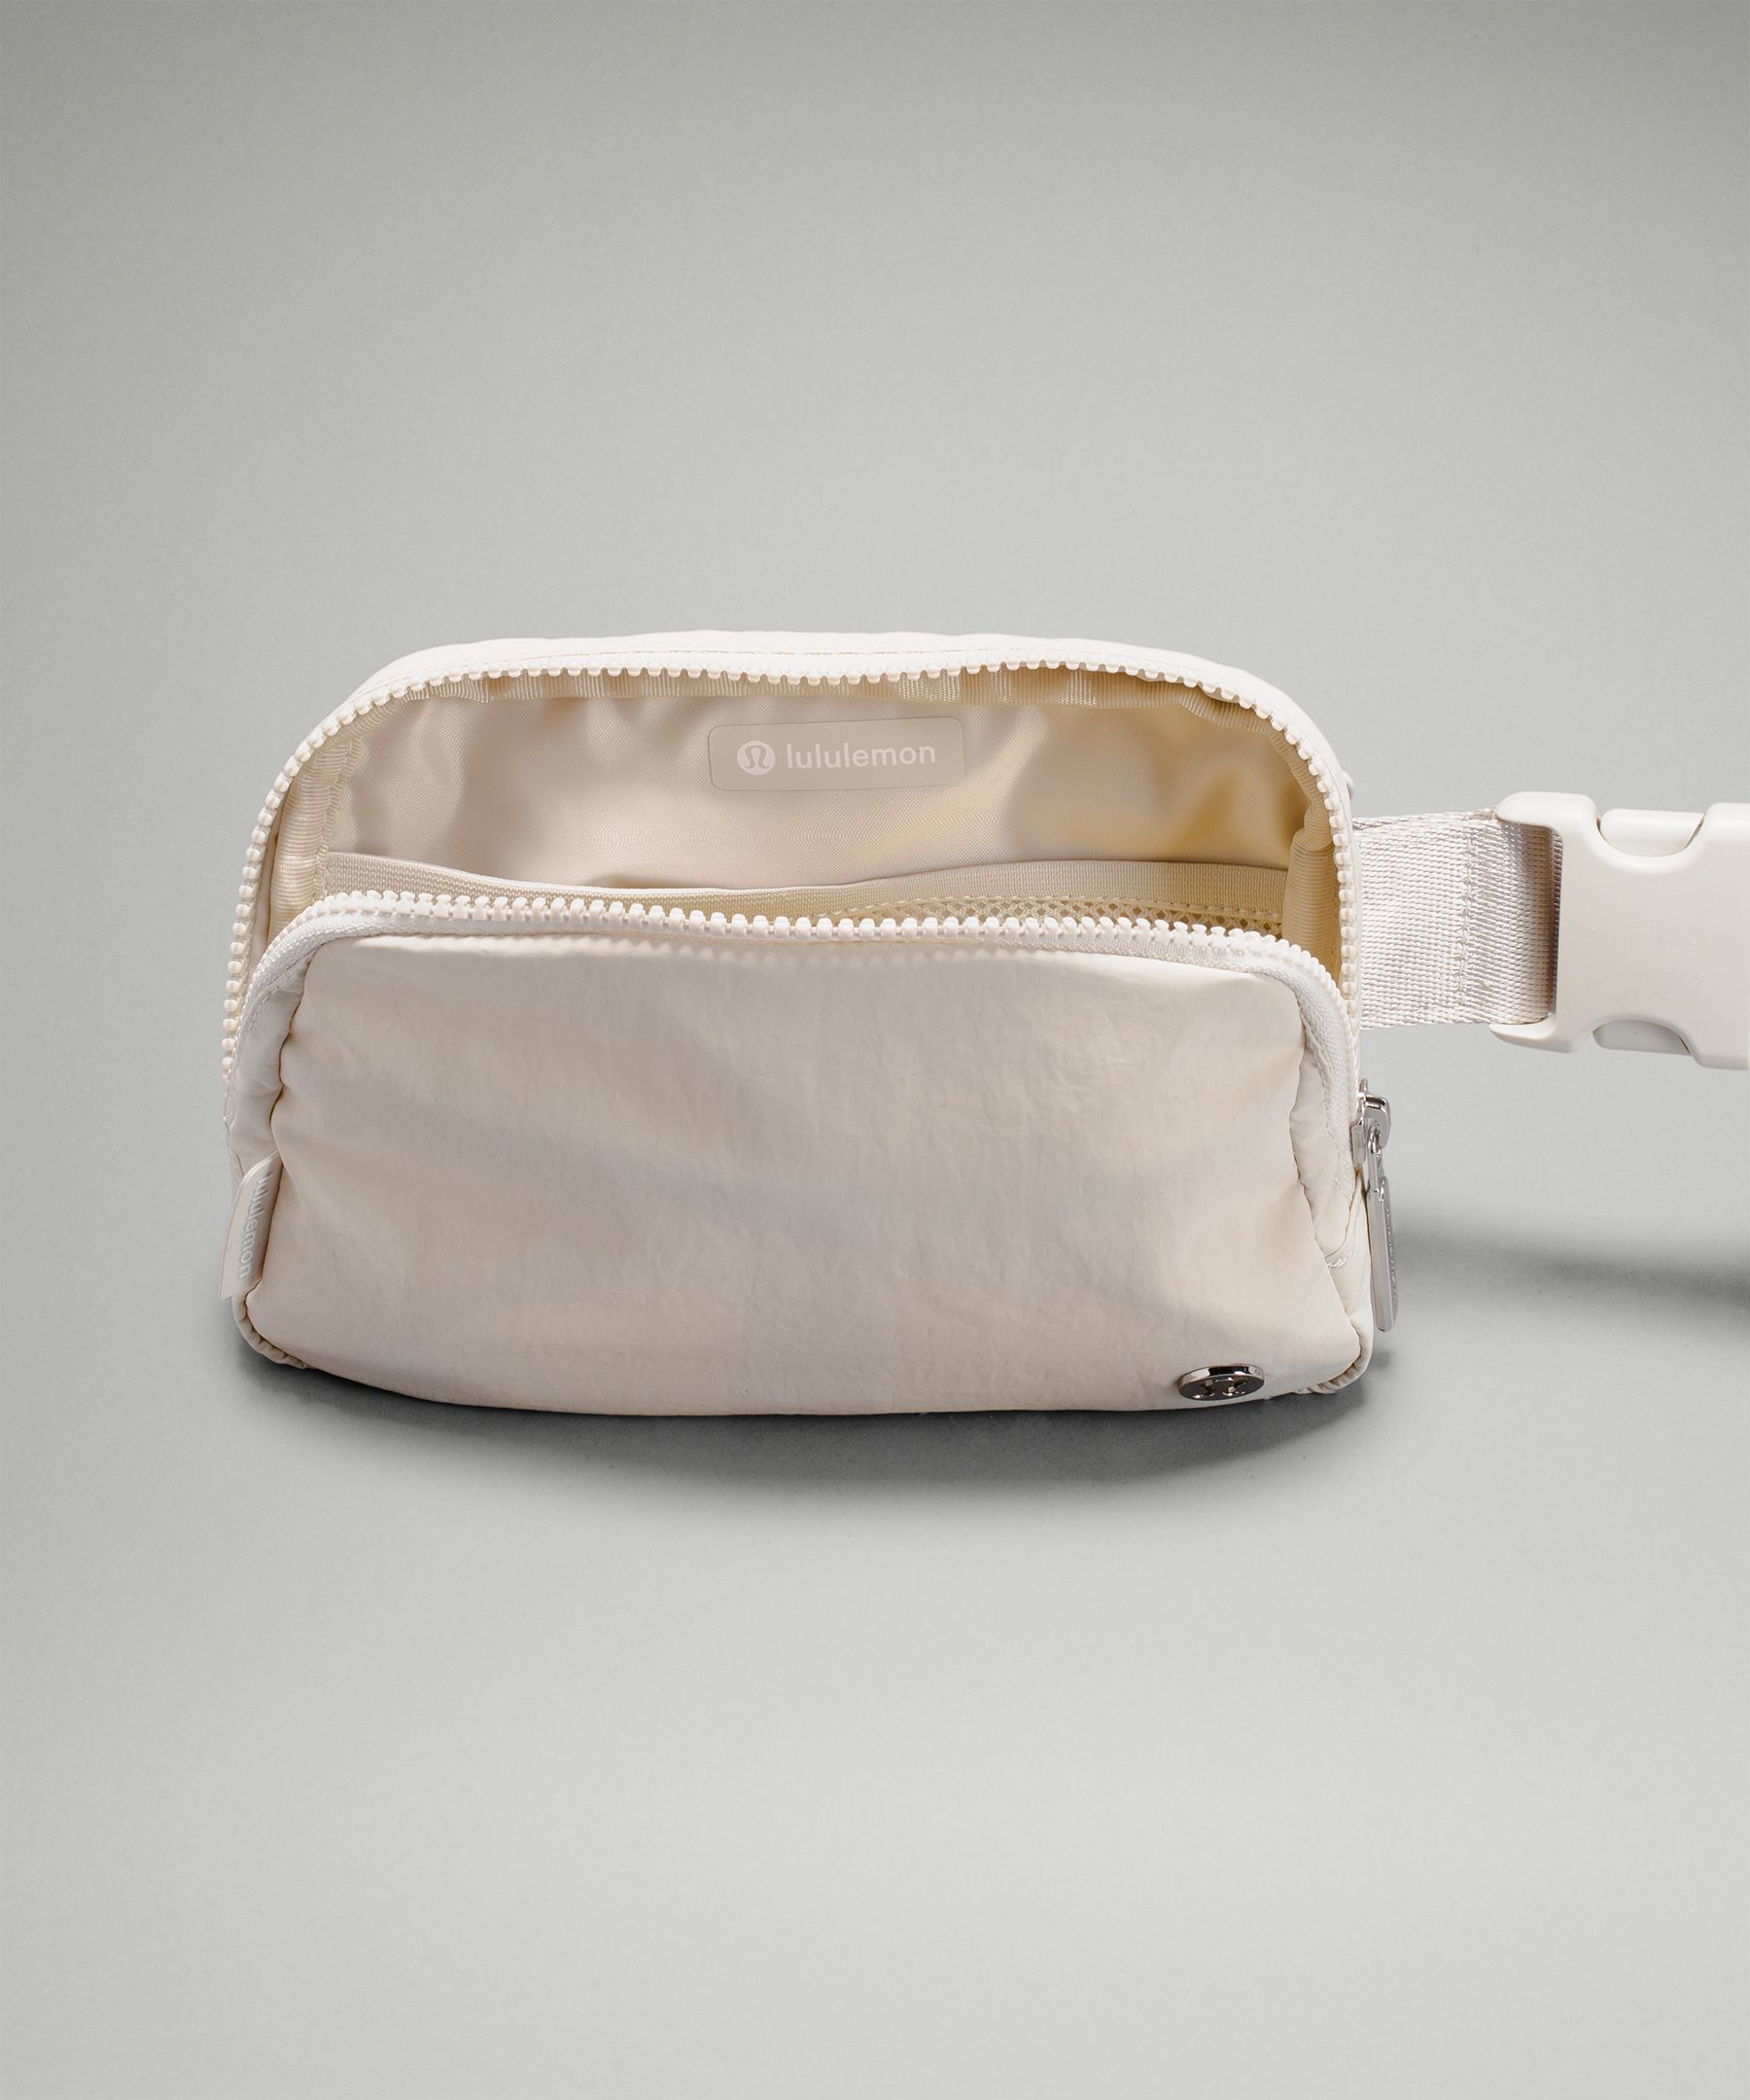 Lululemon Silently Marked Down Popular Belt Bag Styles to $60 and Under